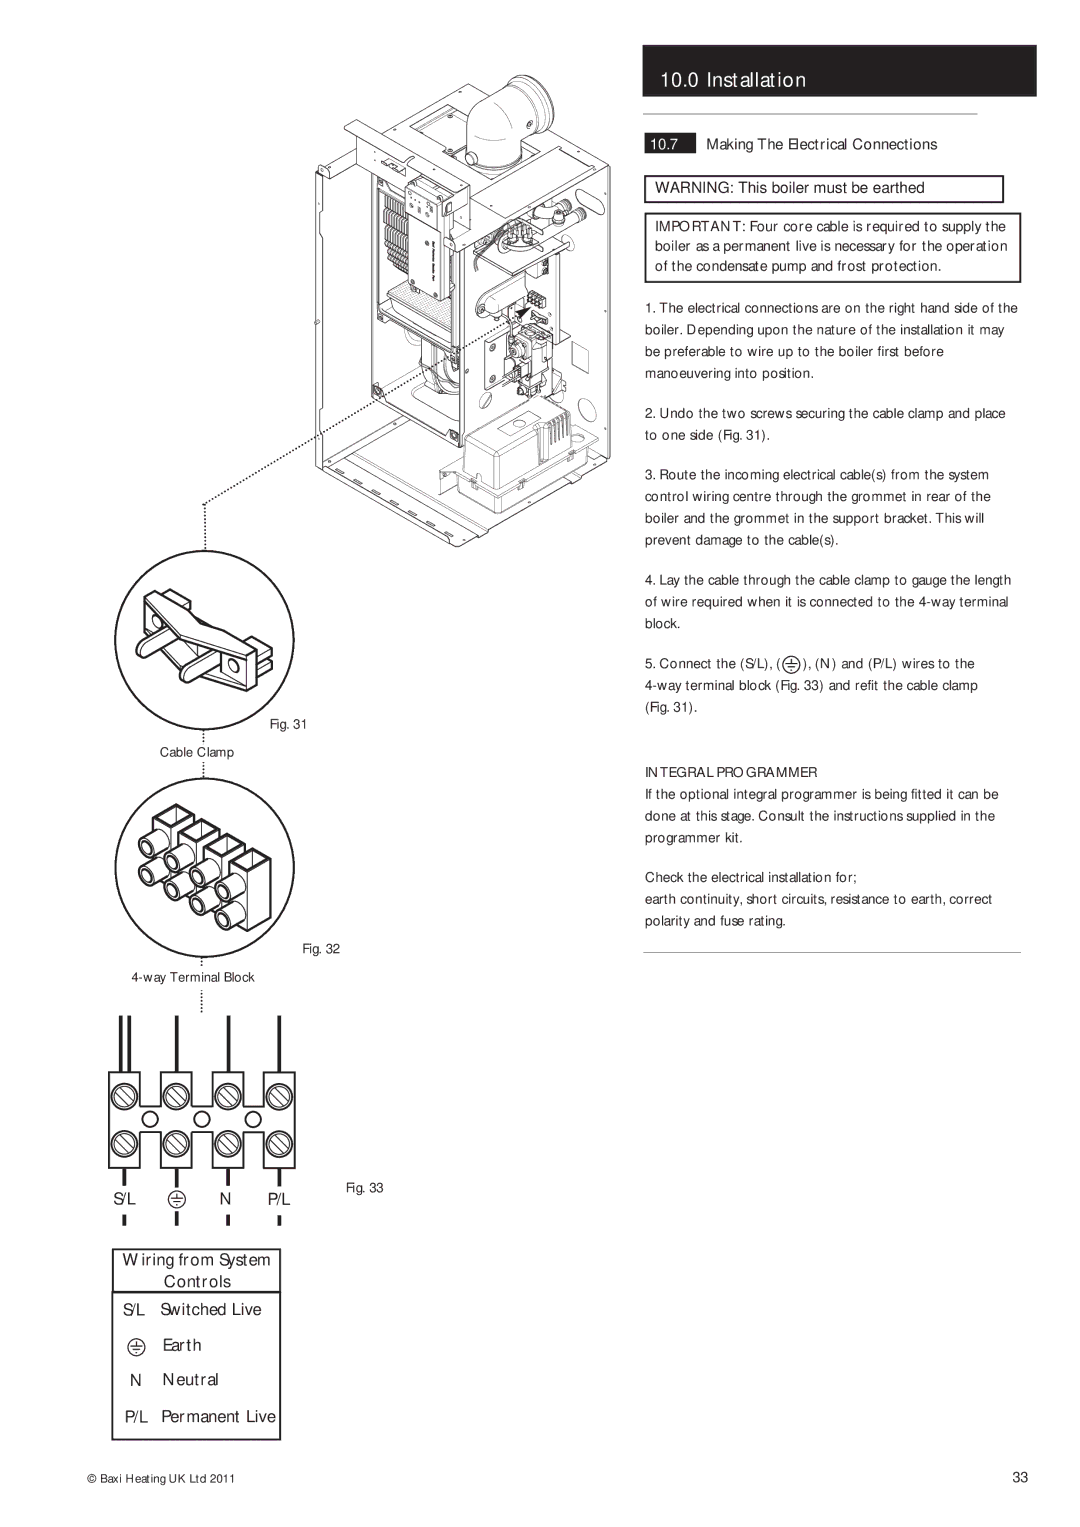 Baxi Potterton Gold FSB 30 HE manual Making The Electrical Connections, Cable Clamp Way Terminal Block, Integral Programmer 